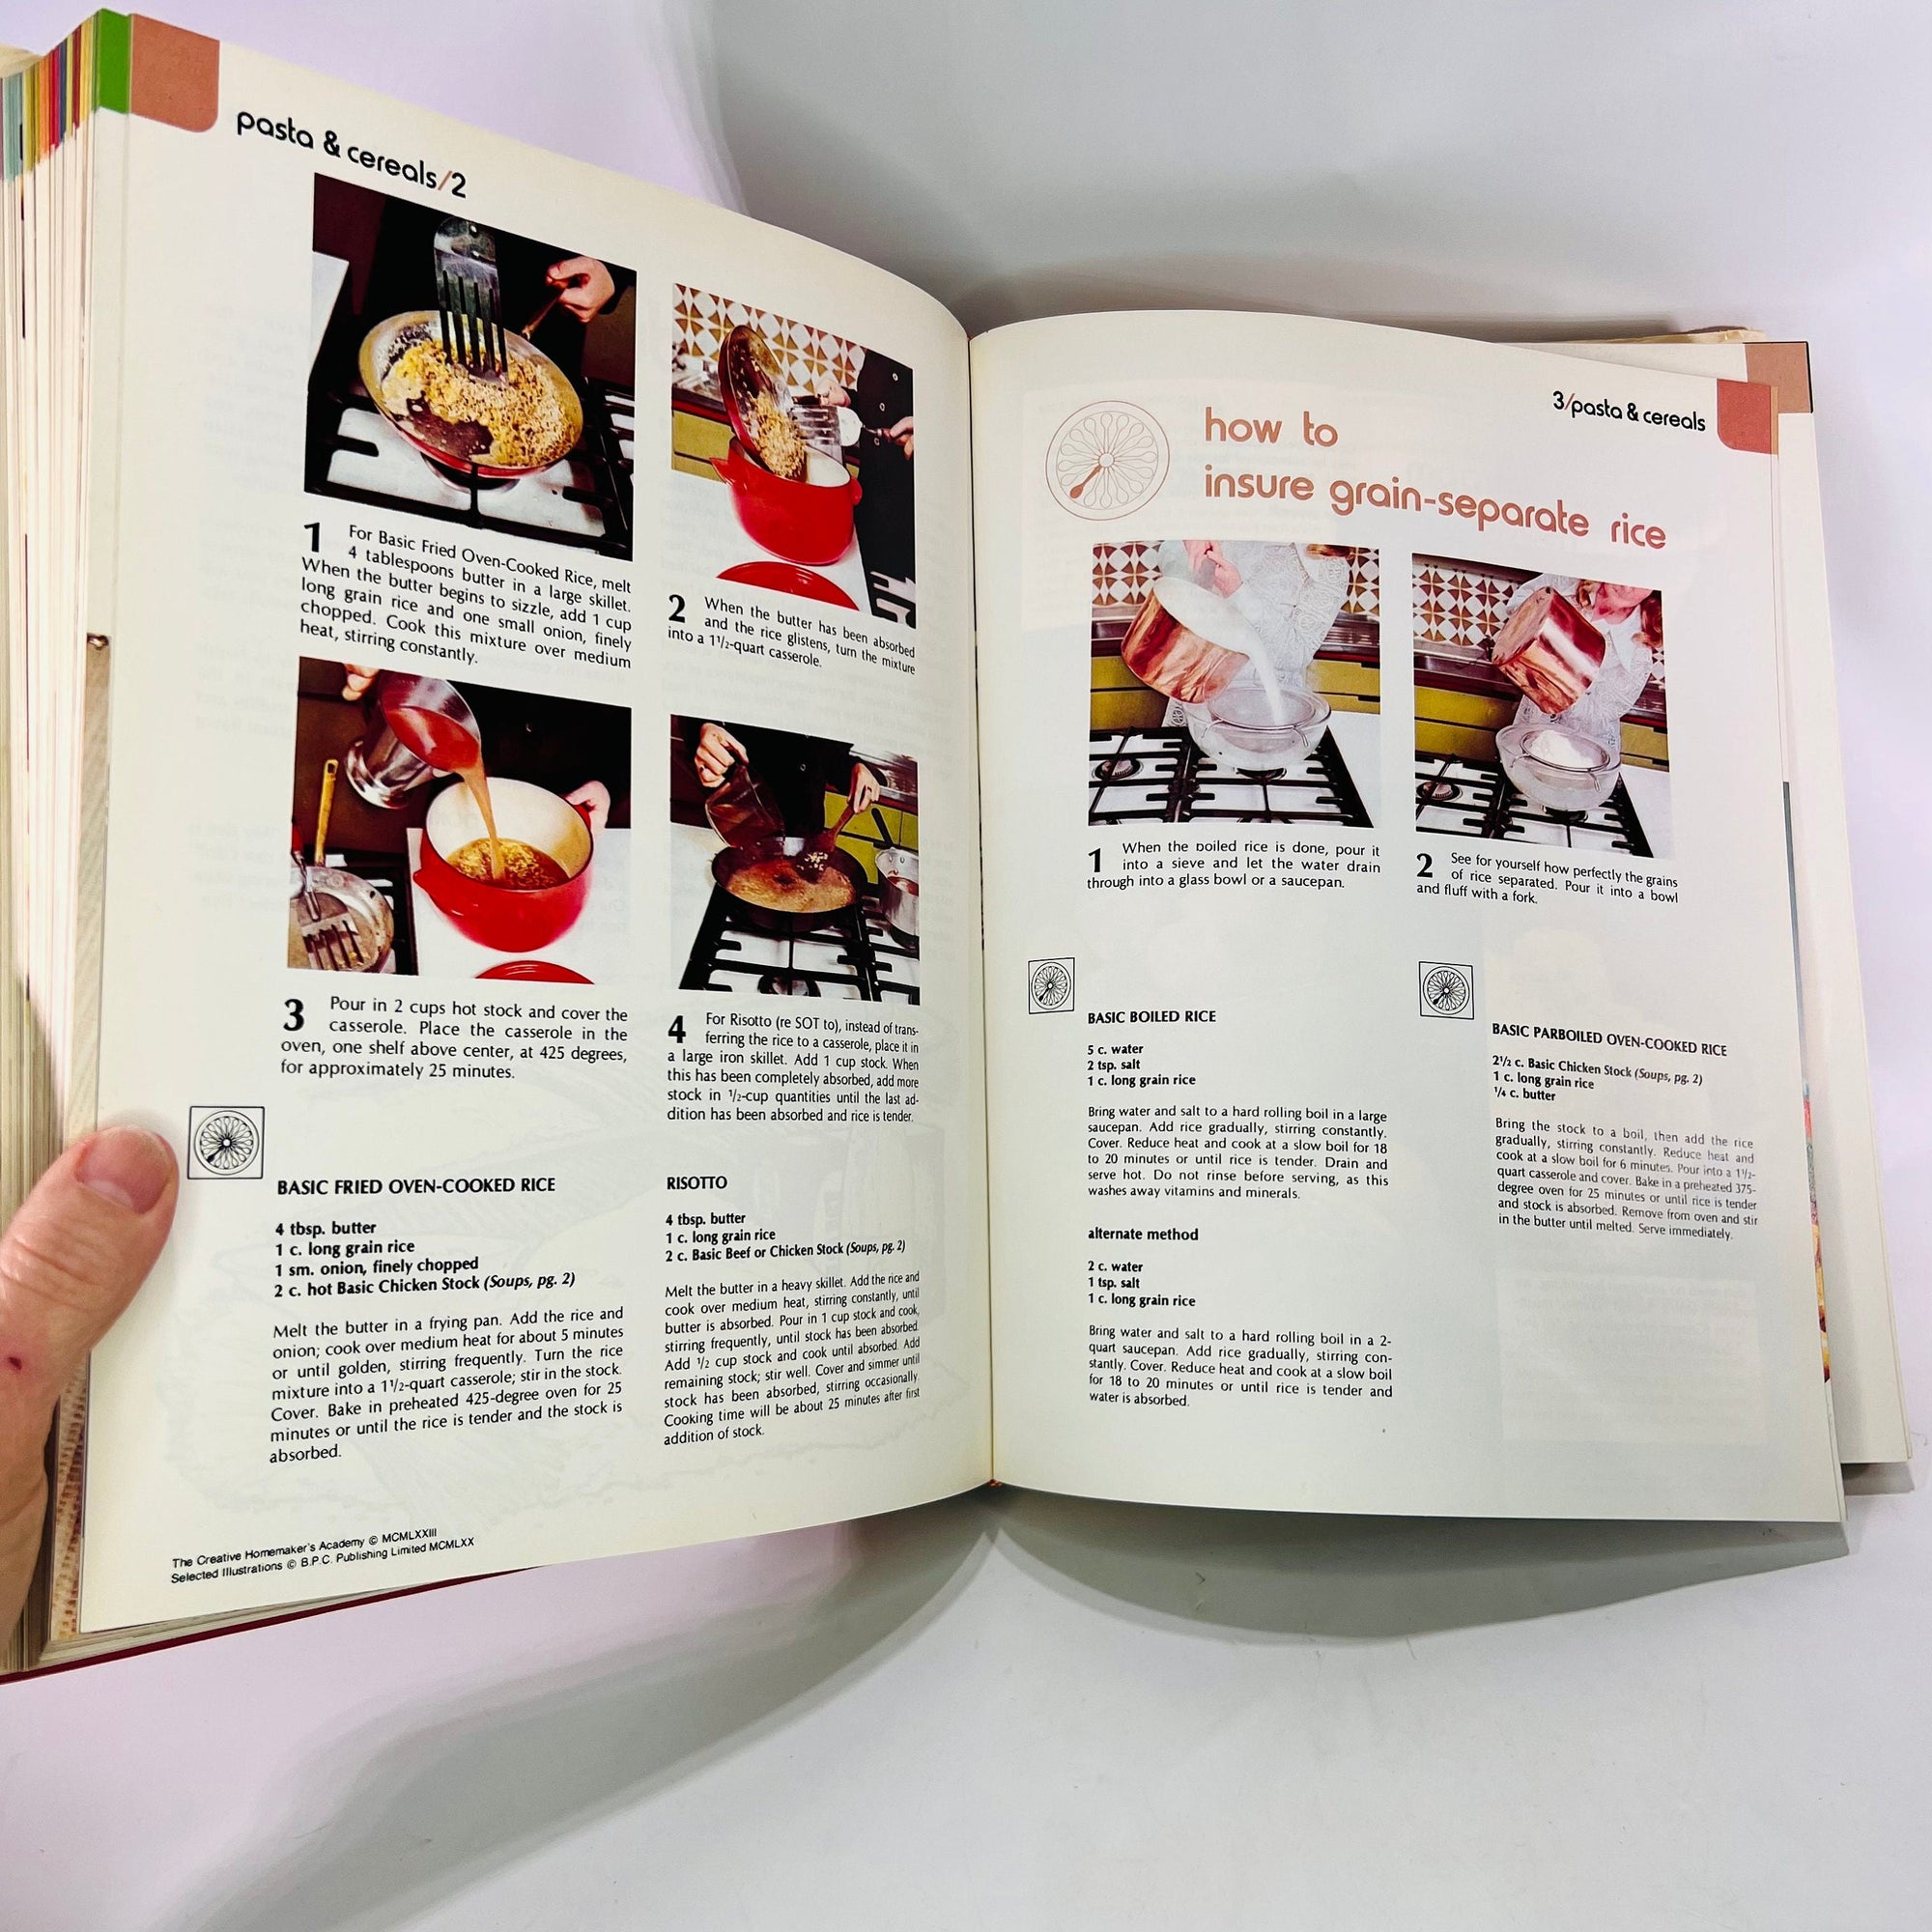 The Creative Cooking Course edited by Charlotte Turgeon from Larousse Gastromiue 1982 Weathervane Books Vintage Book